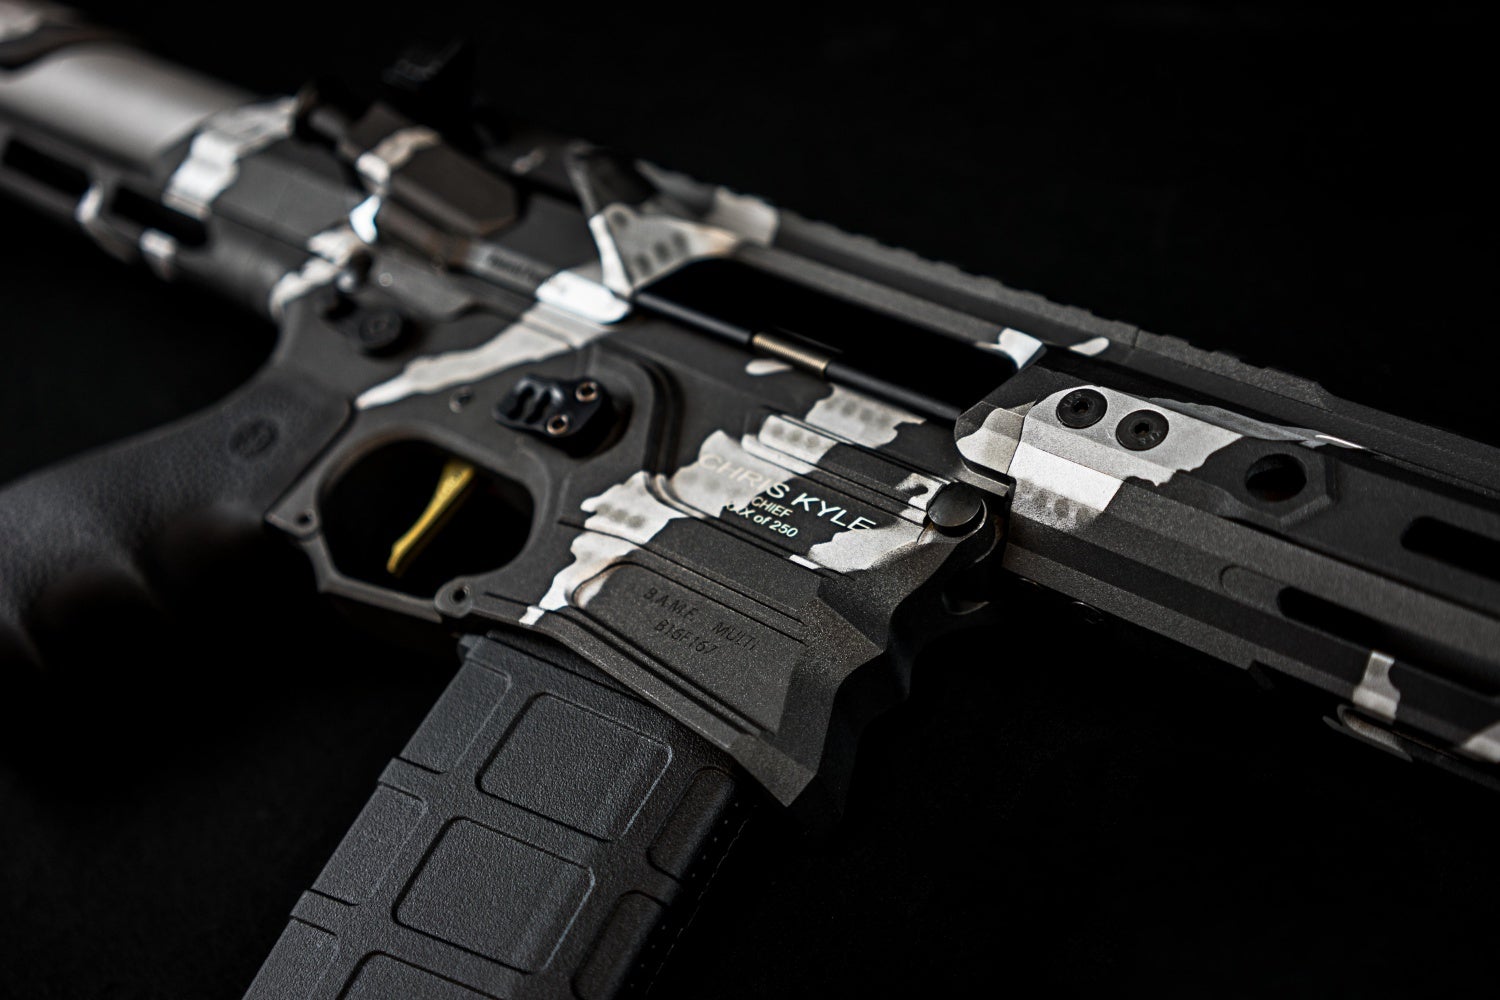 All of the rifles feature the Collection name, rifle name, and custom number. Image from T4 Photo